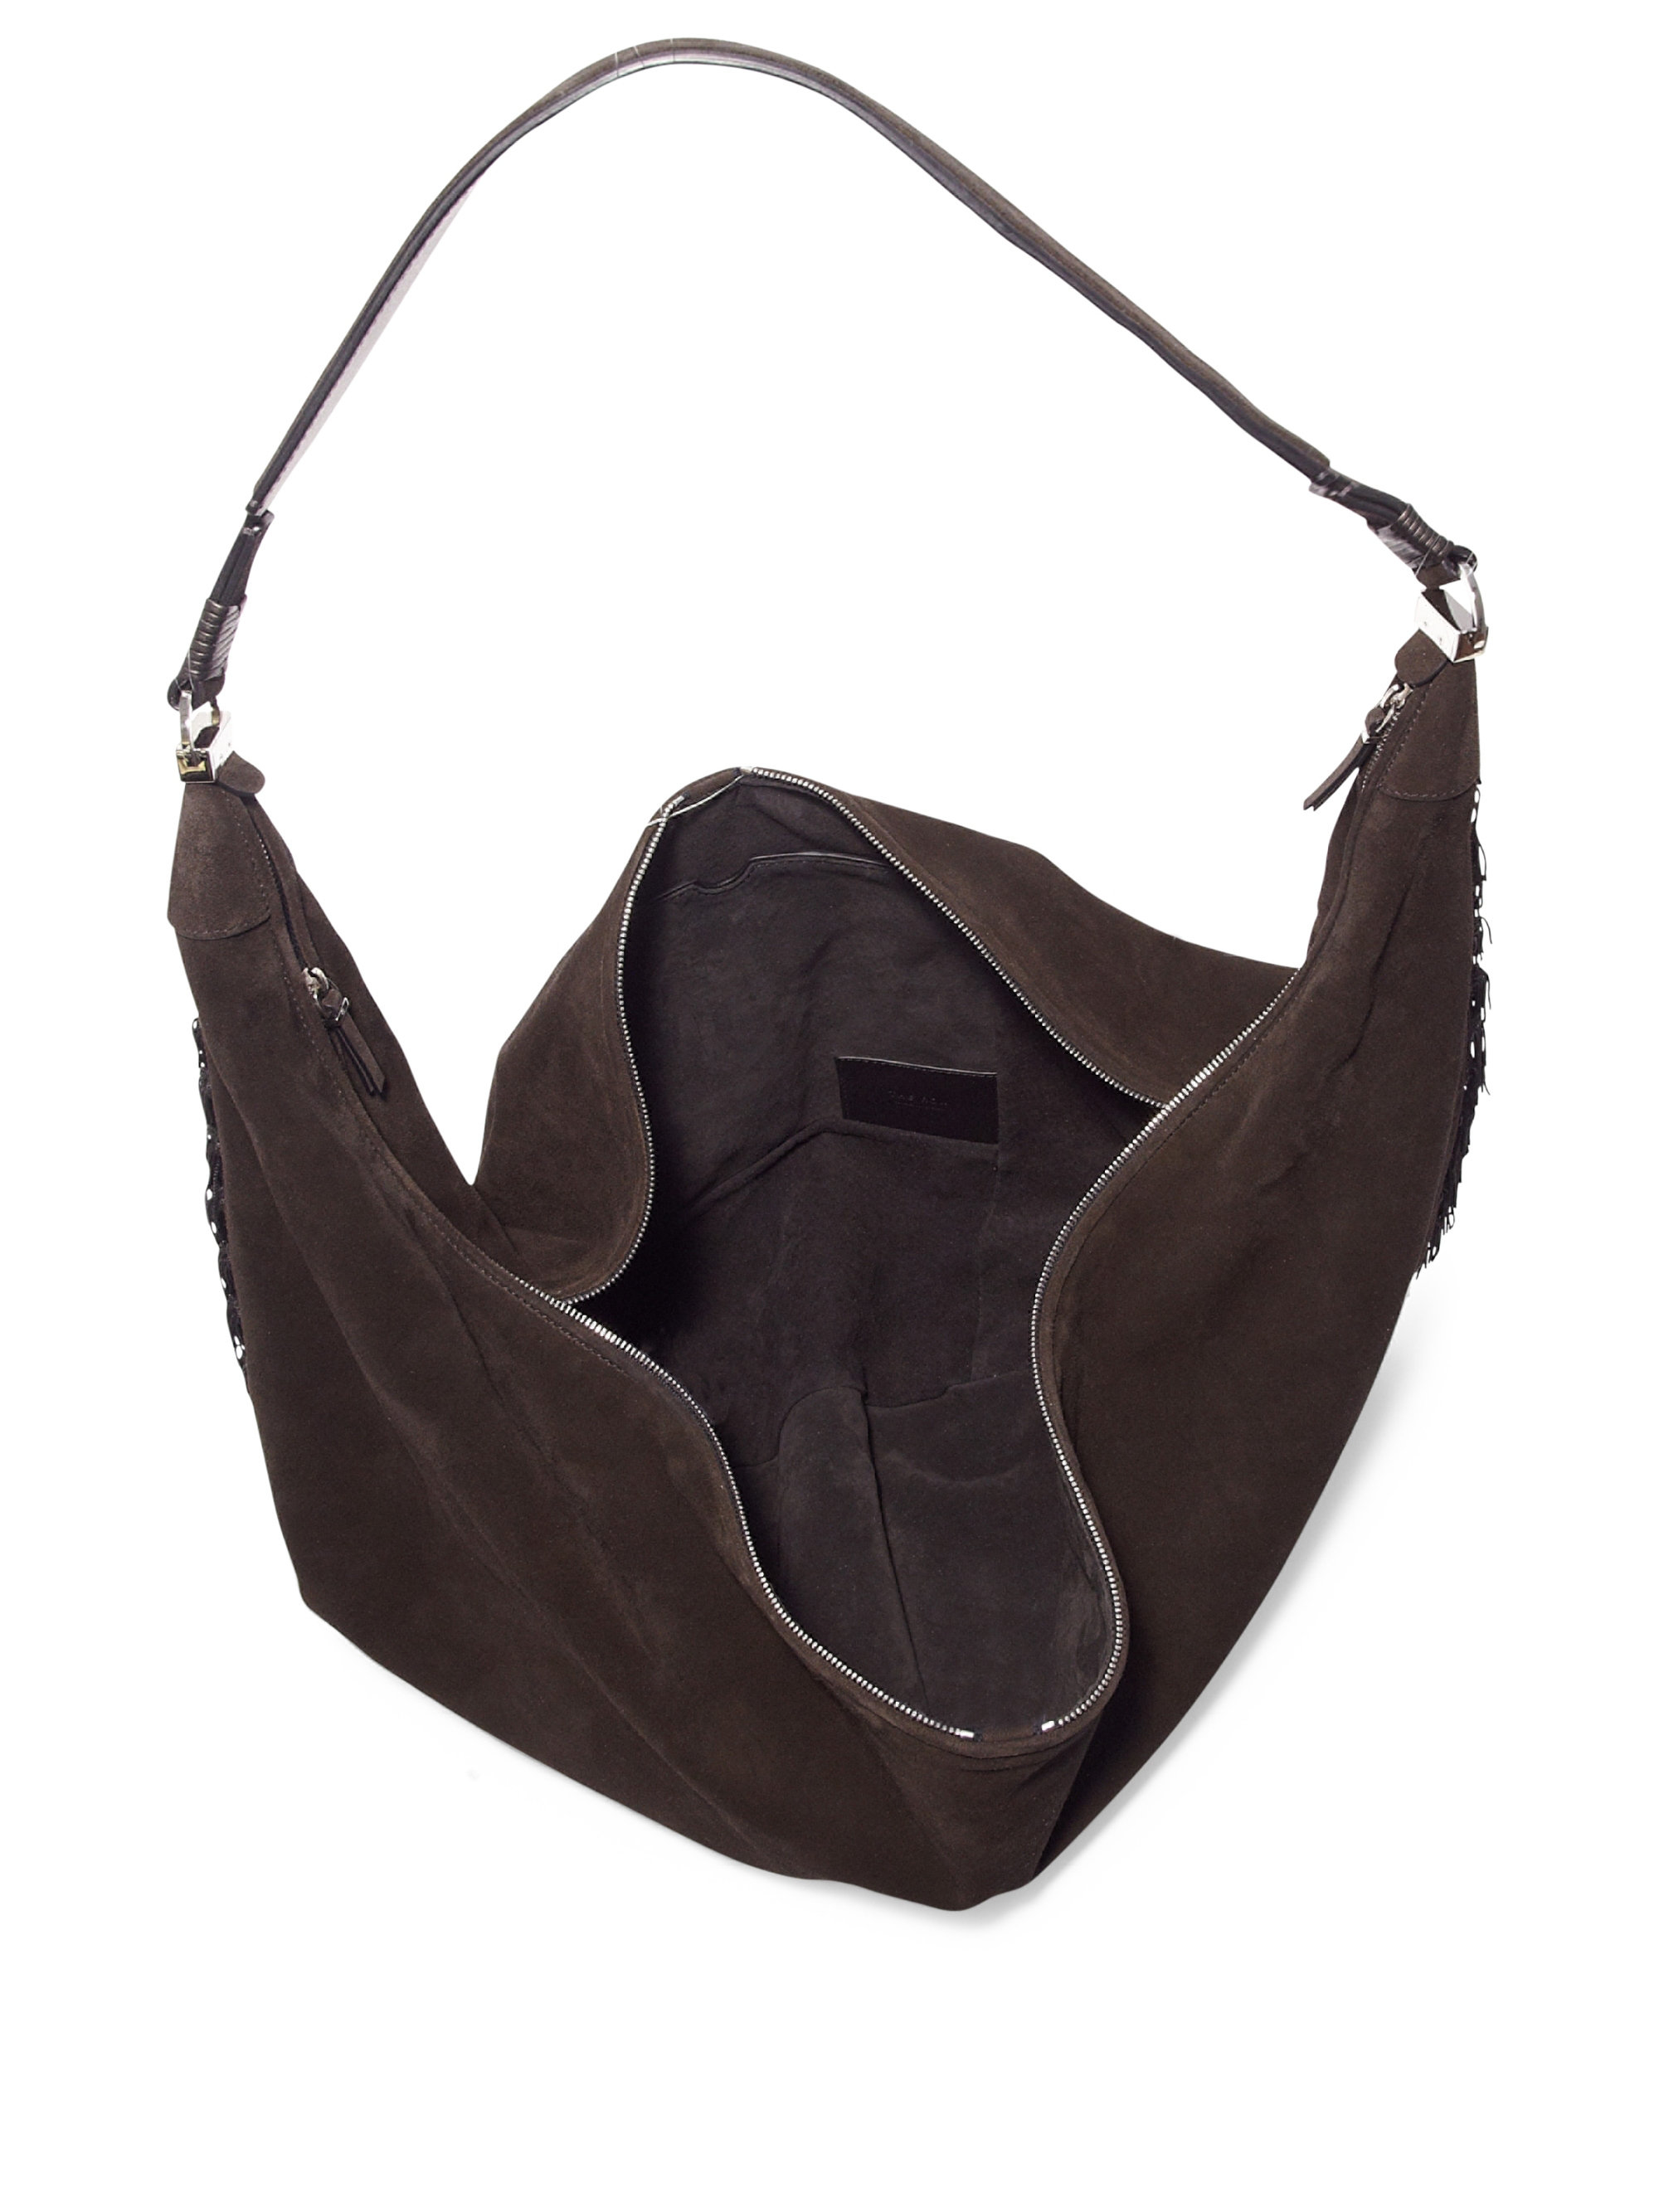 Lyst - The Row Sling 15 Ostrich Leather Hobo Bag in Black